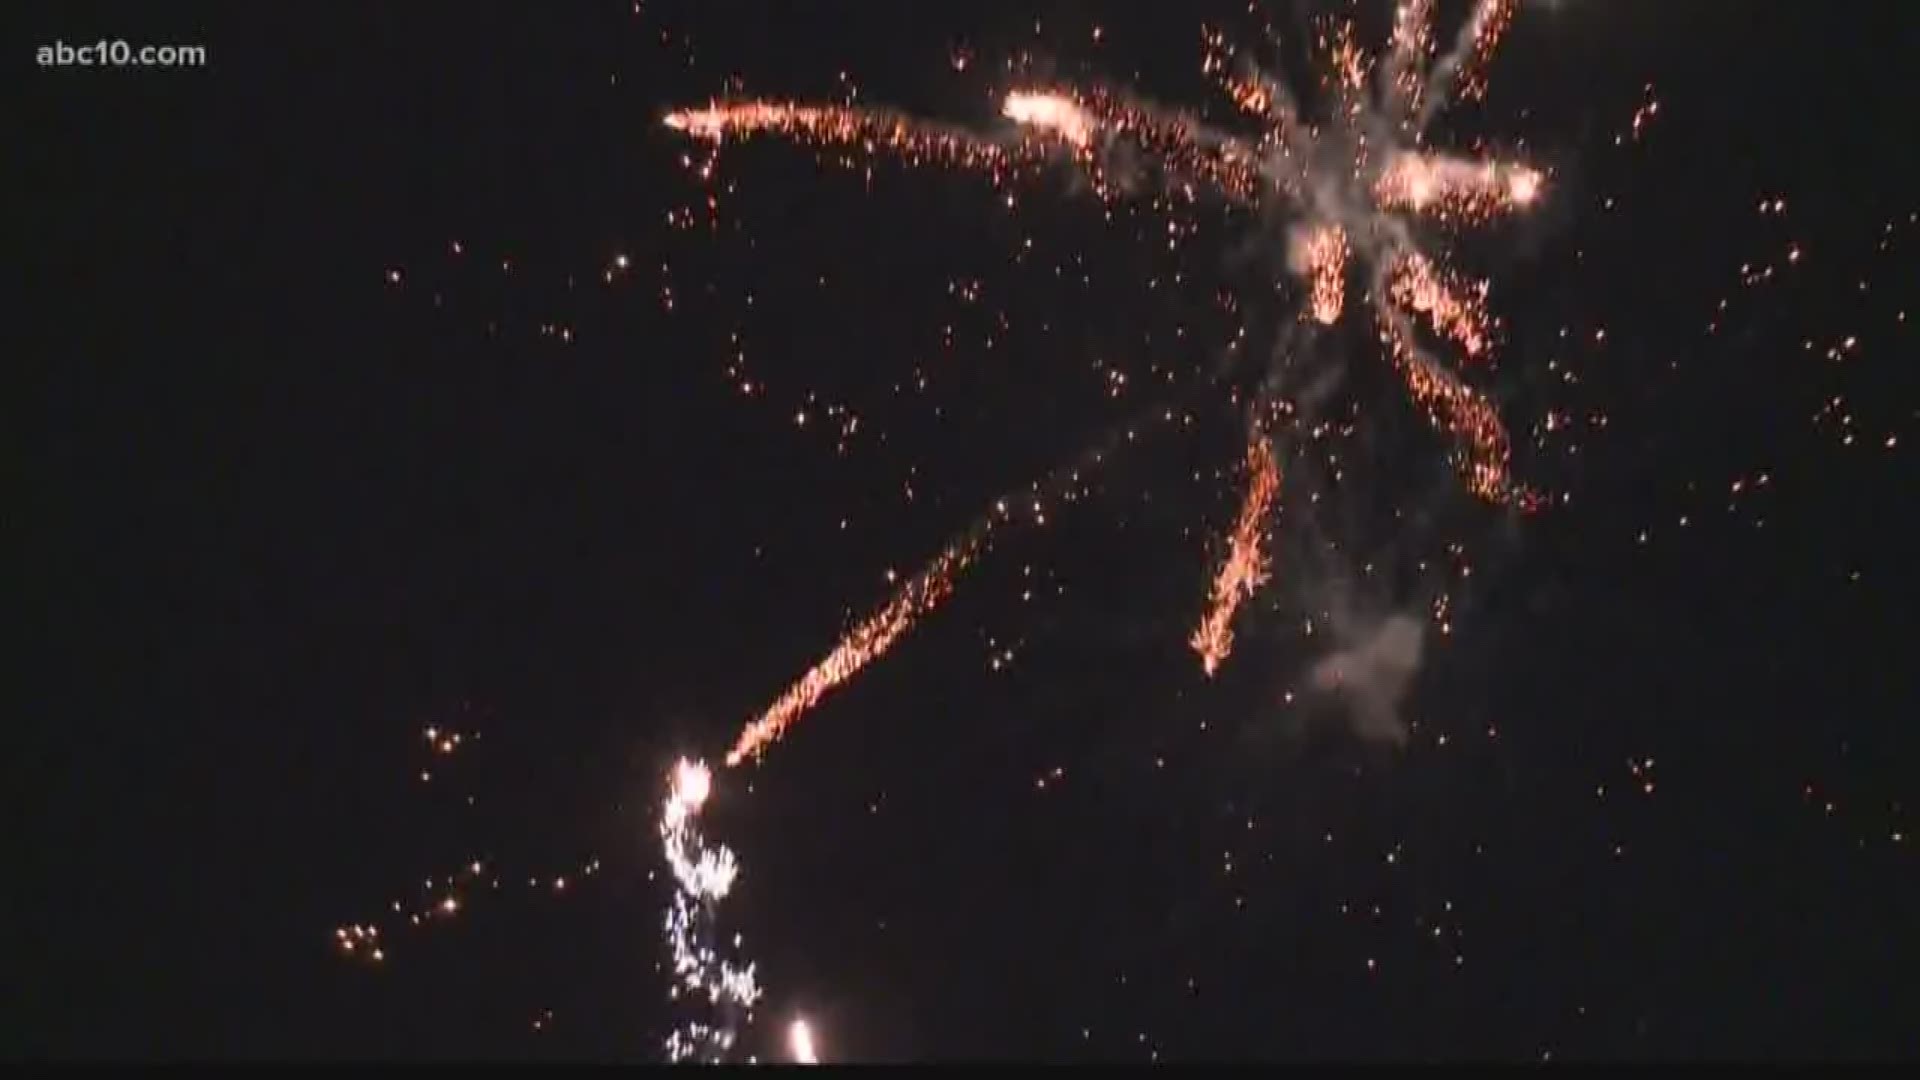 In a video streamed on the ABC 10 Facebook page July 4, followers chimed in as dozens of illegal fireworks displays exploded over the city of half a million.